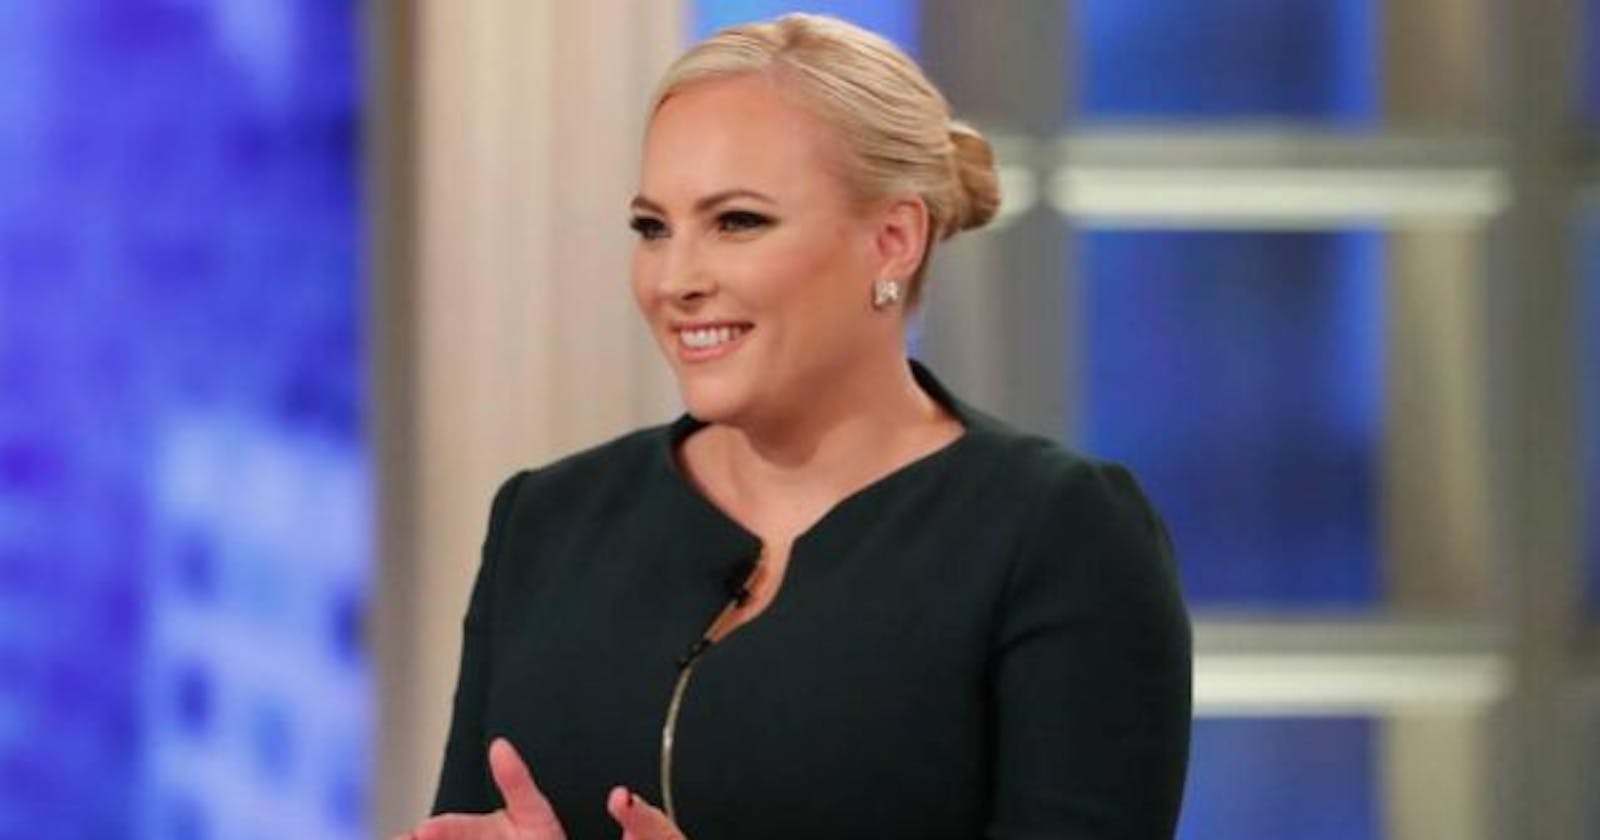 Why Meghan McCain Is Being Mocked Over Workplace Representation Comments